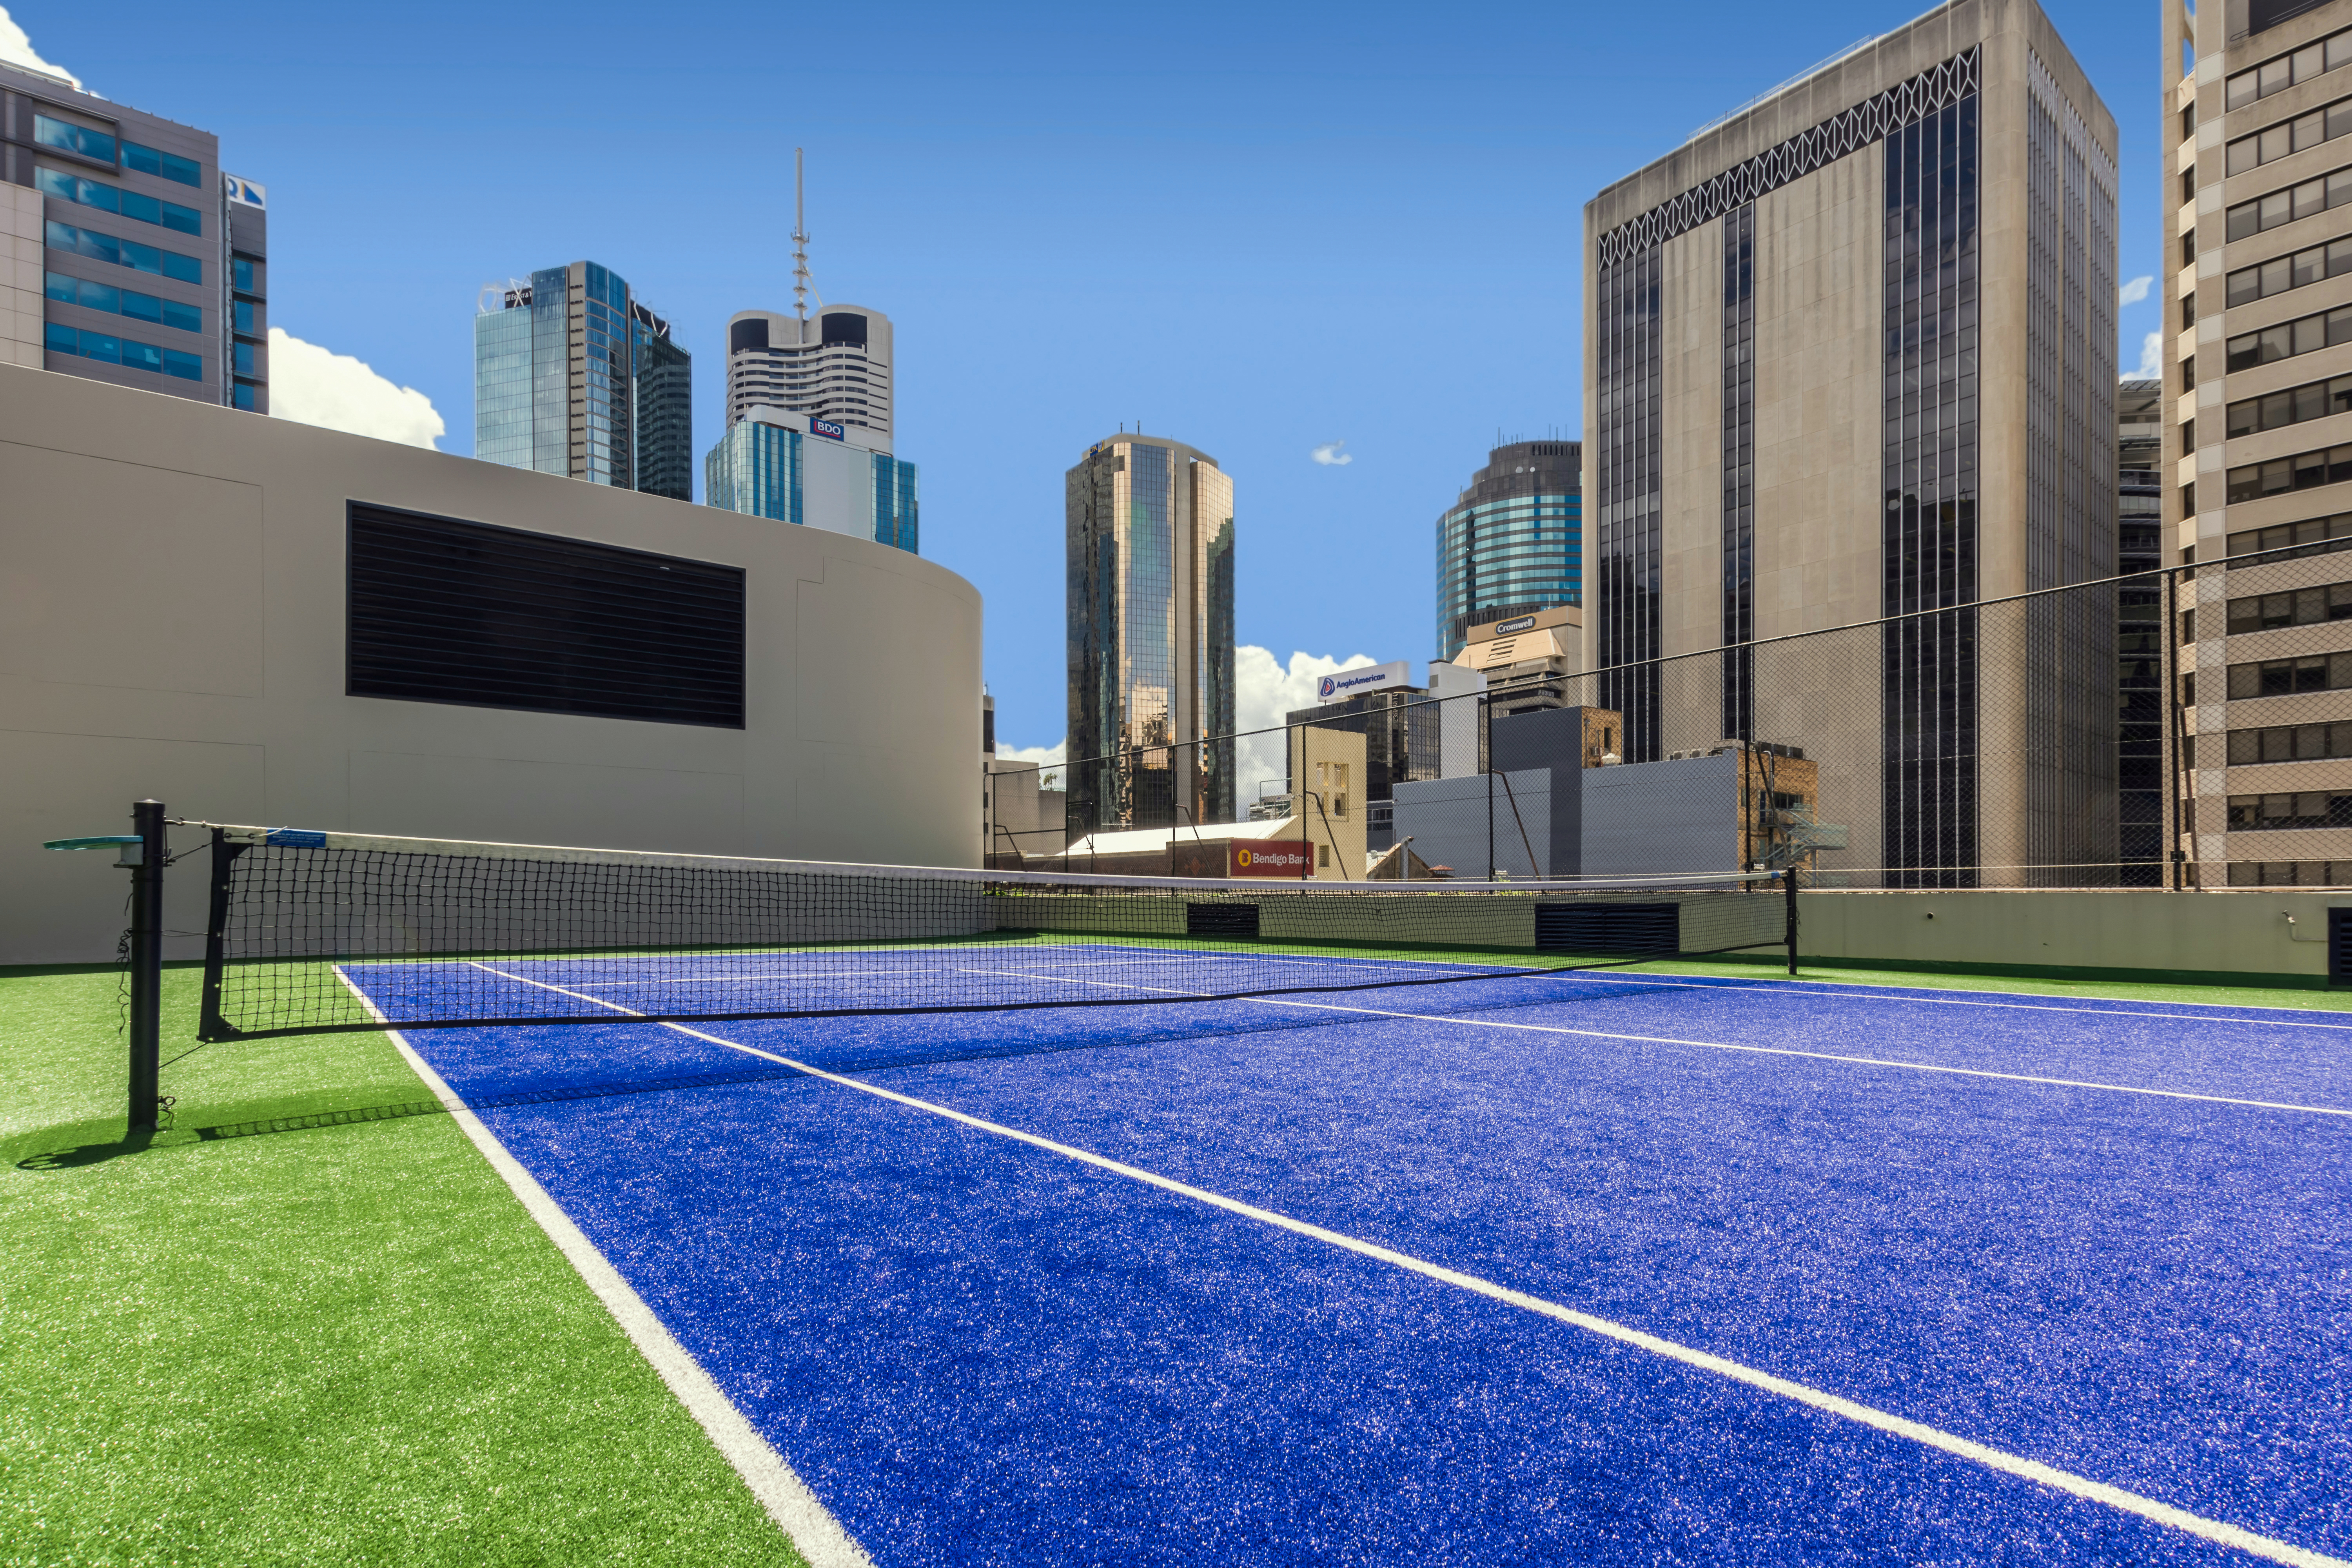 Rooftop Tennis Court and View of City